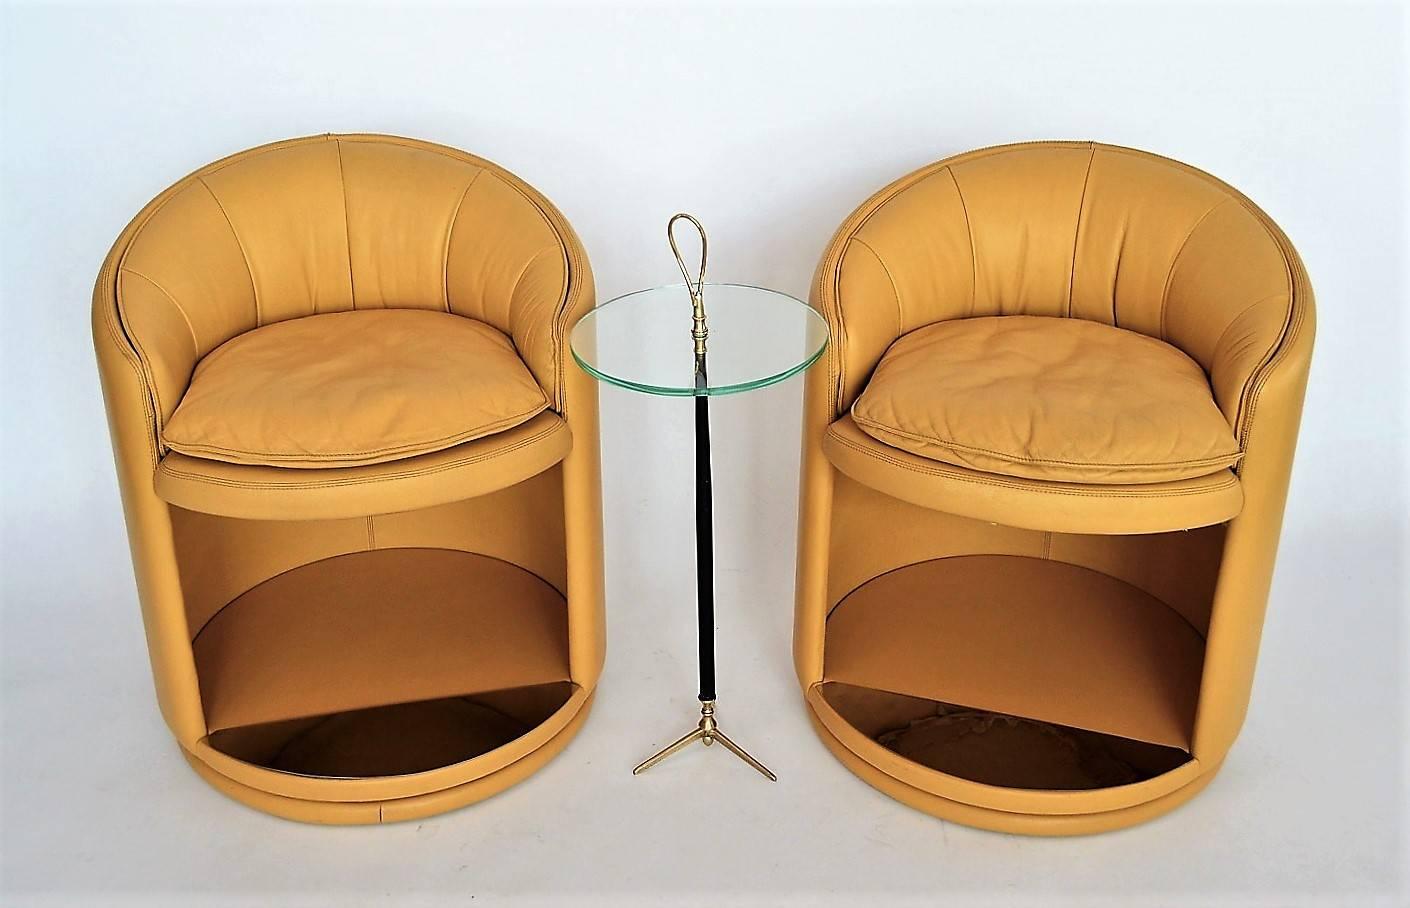 Two beautiful design swivel chairs in a delicate mustard-yellow / beige soft leather; all seams are impeccably preserved.
The chairs rotate perfectly on the basis of the integrated ball bearing between the two lower round base plates (see